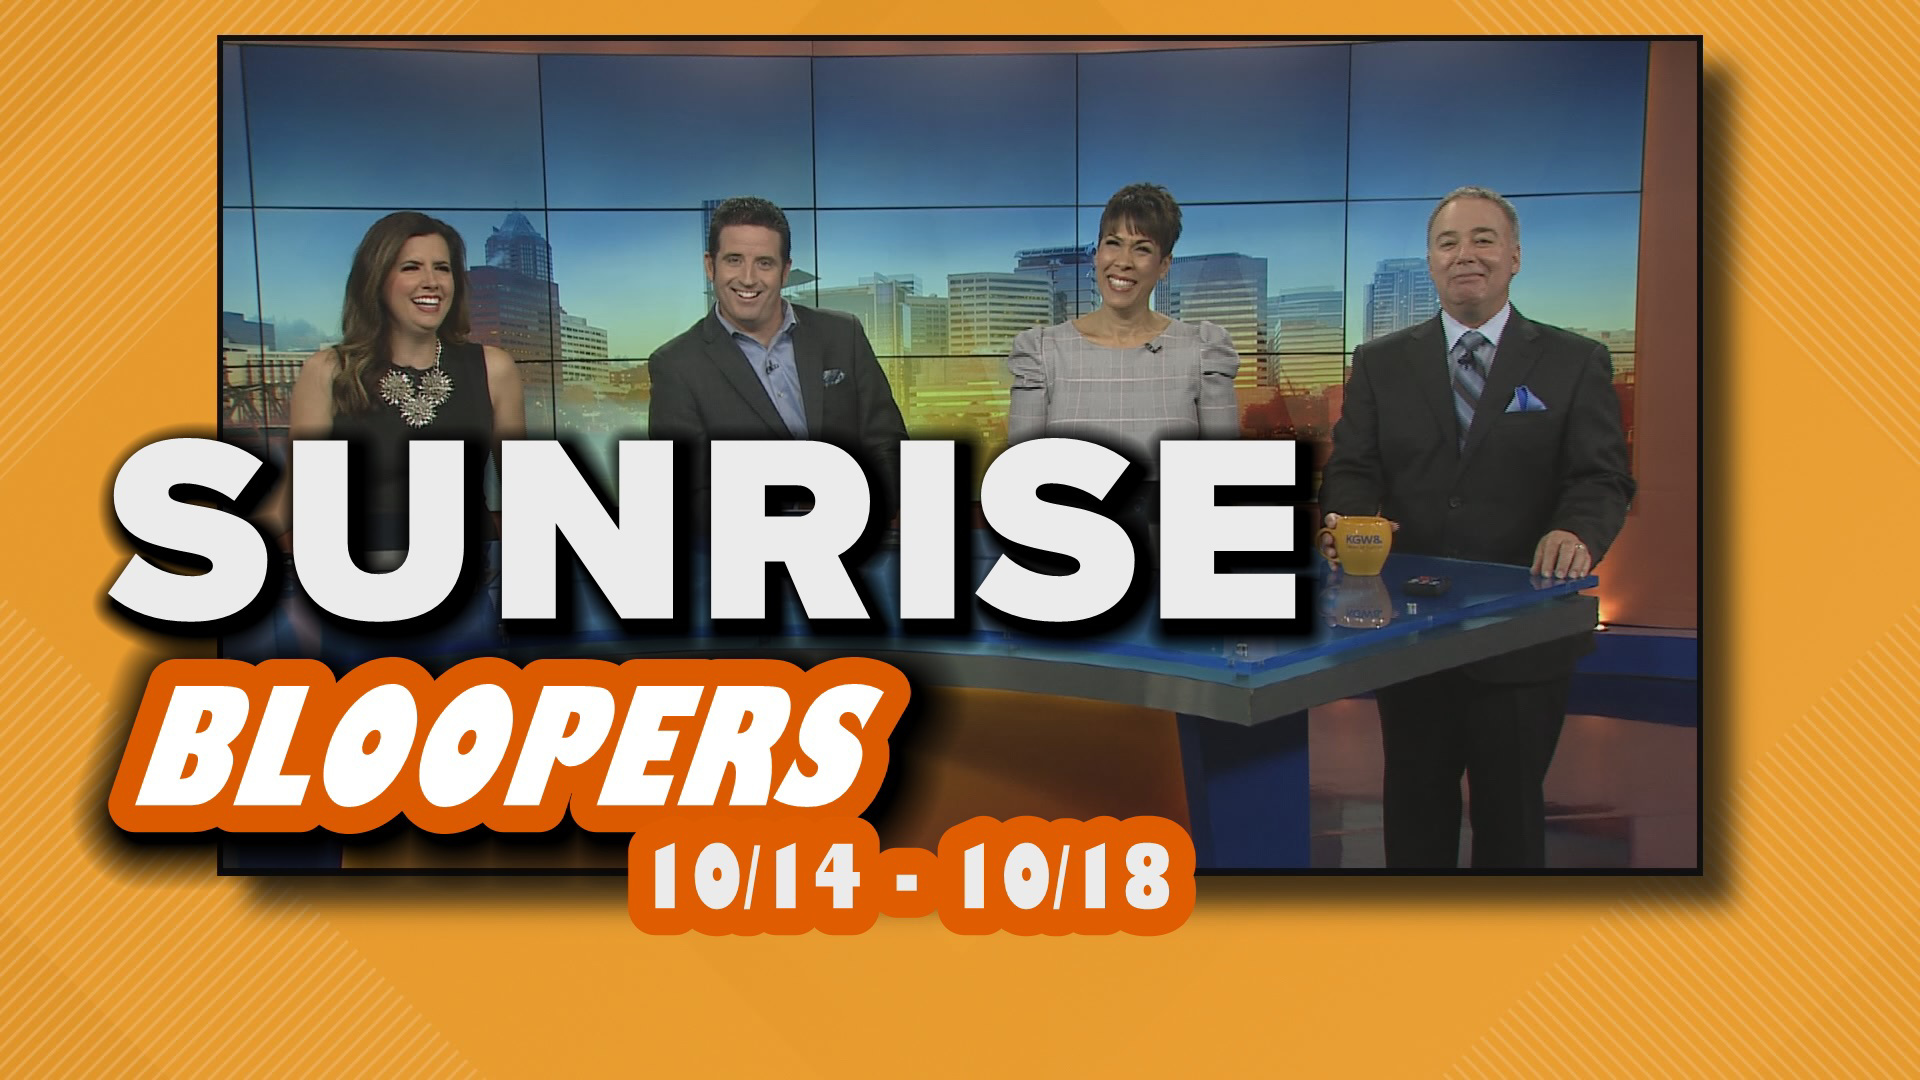 All of the funniest moments from this week on Sunrise.